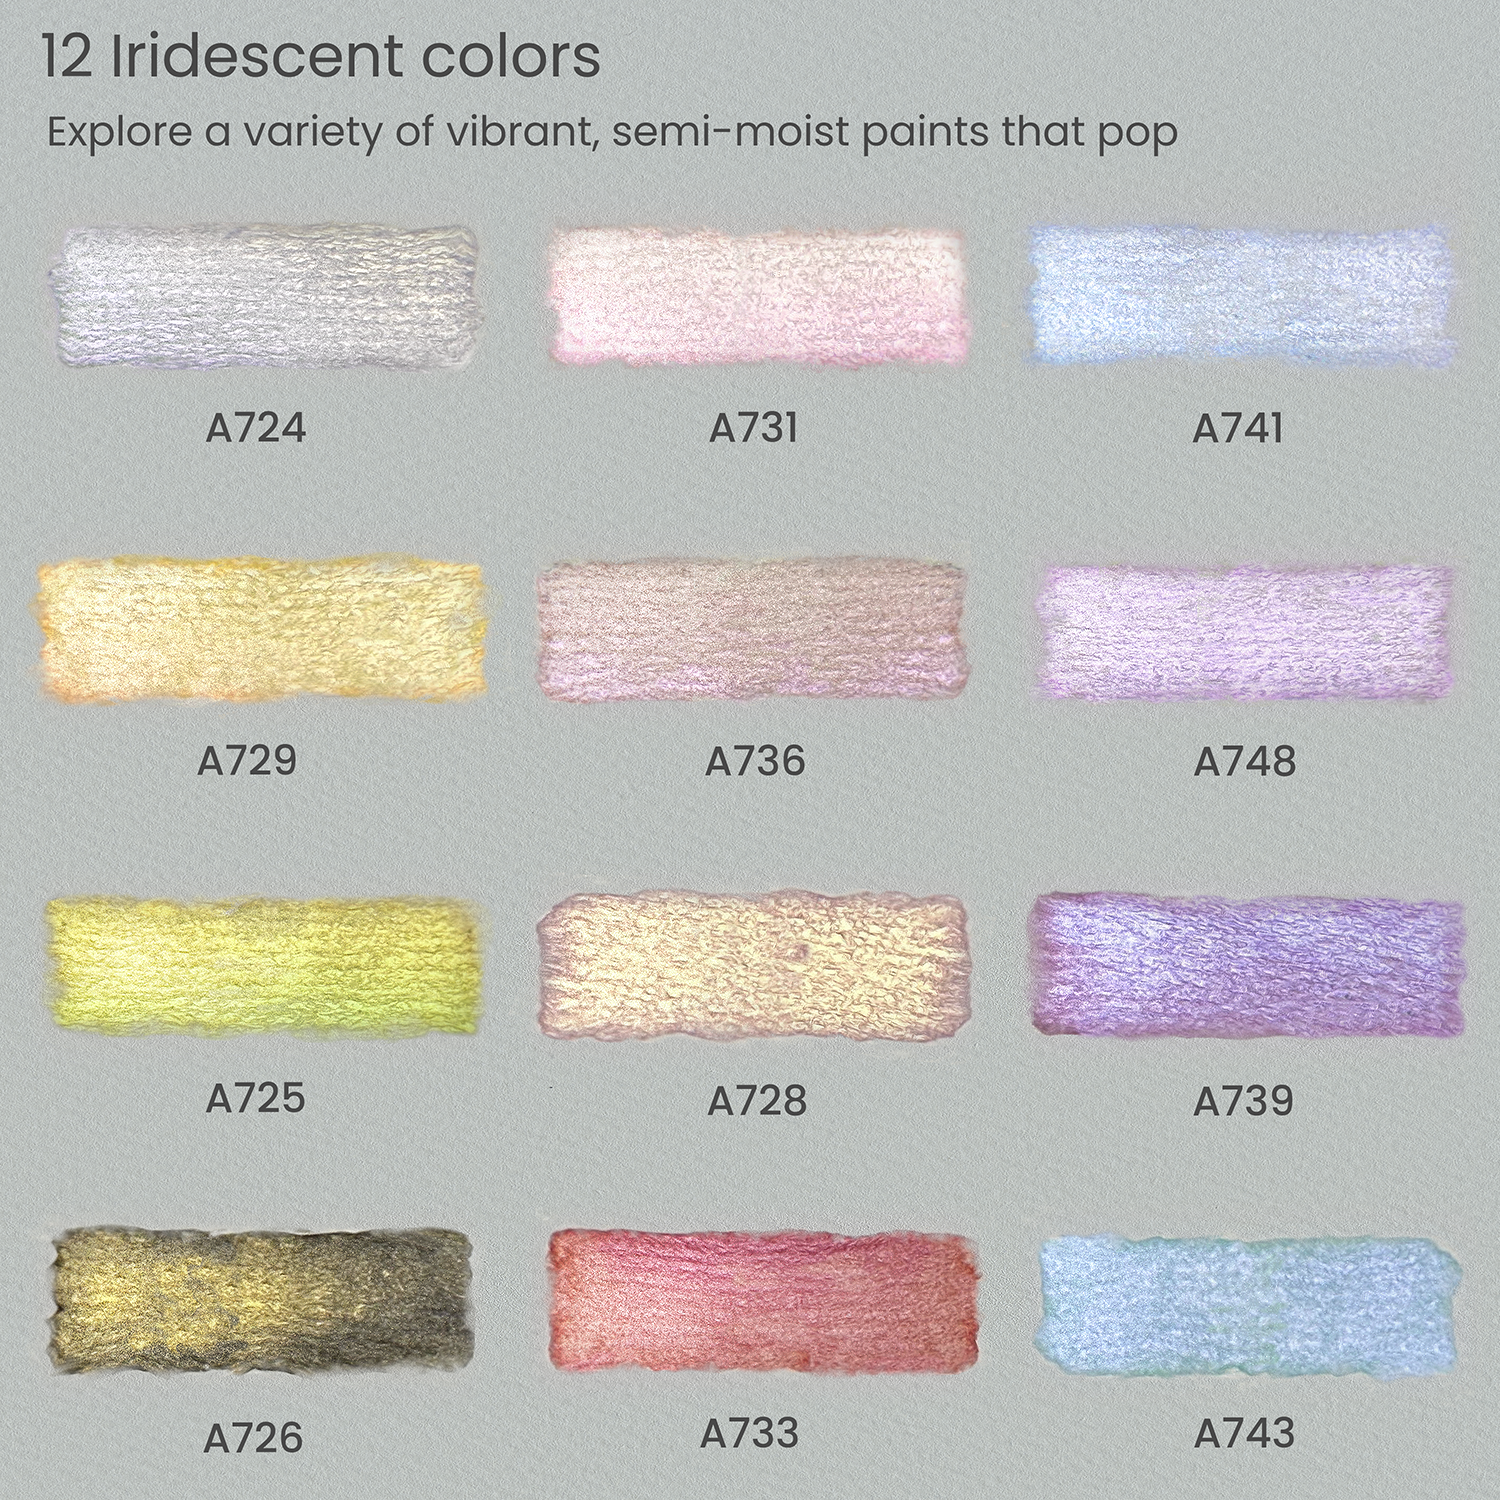  ARTEZA Iridescent Watercolor Paint Set, 12 Metallic Pearl  Colors Half-Pans, Brush included, Reusable Glitter Paint, Non-Toxic, Art  Supplies for Artists, Hobby Painters